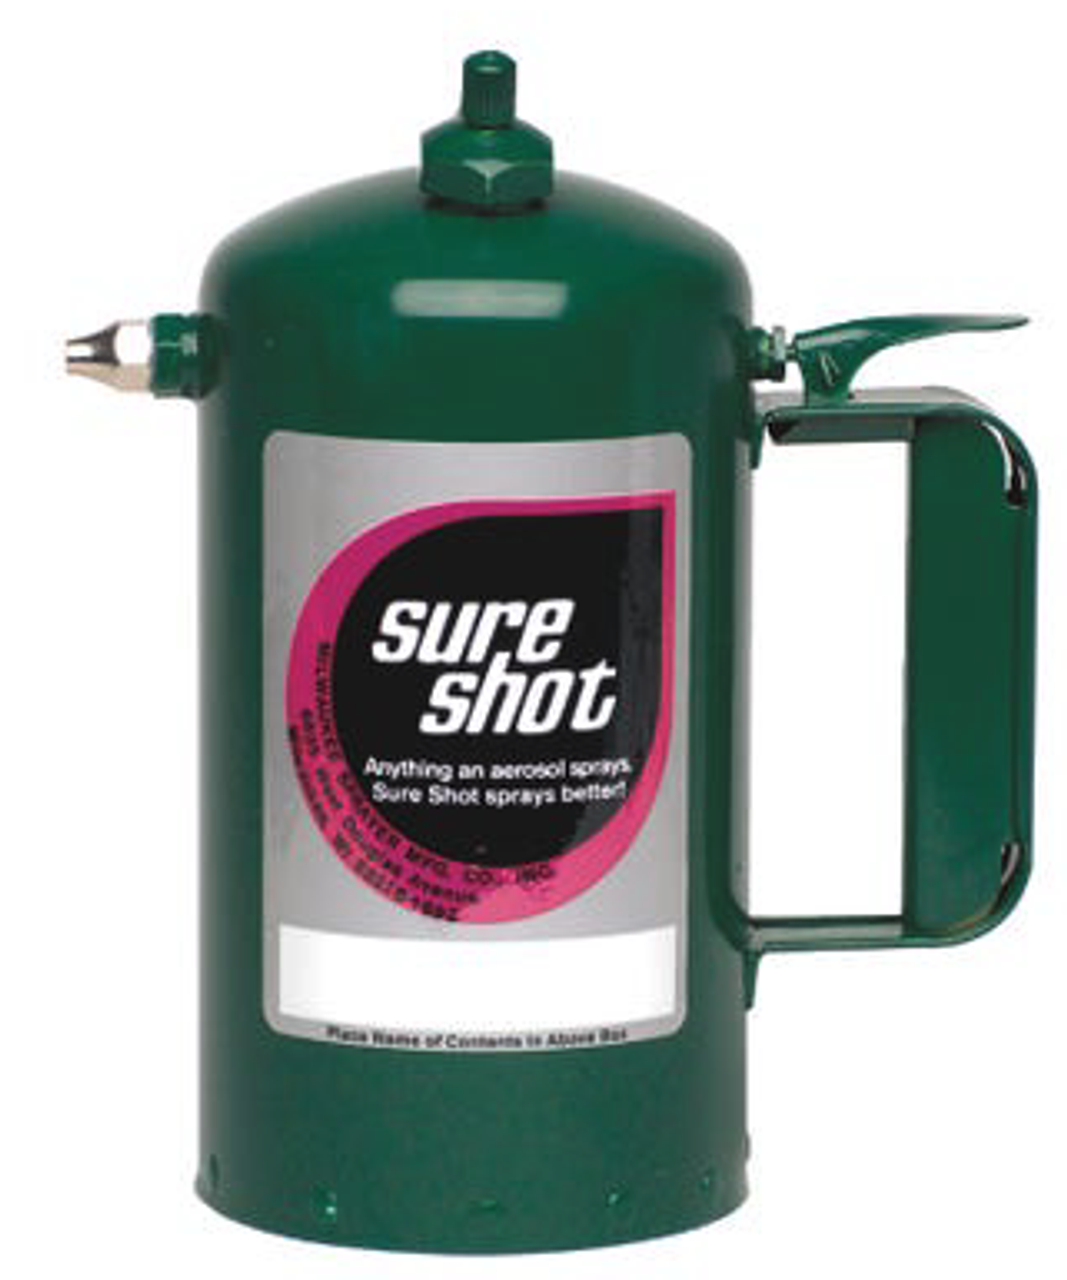 SURE SHOT A2000 Sprayer Type, Solvent Based; Water Based Base Fluid, 32 oz.  Container Size Rechargeable Air